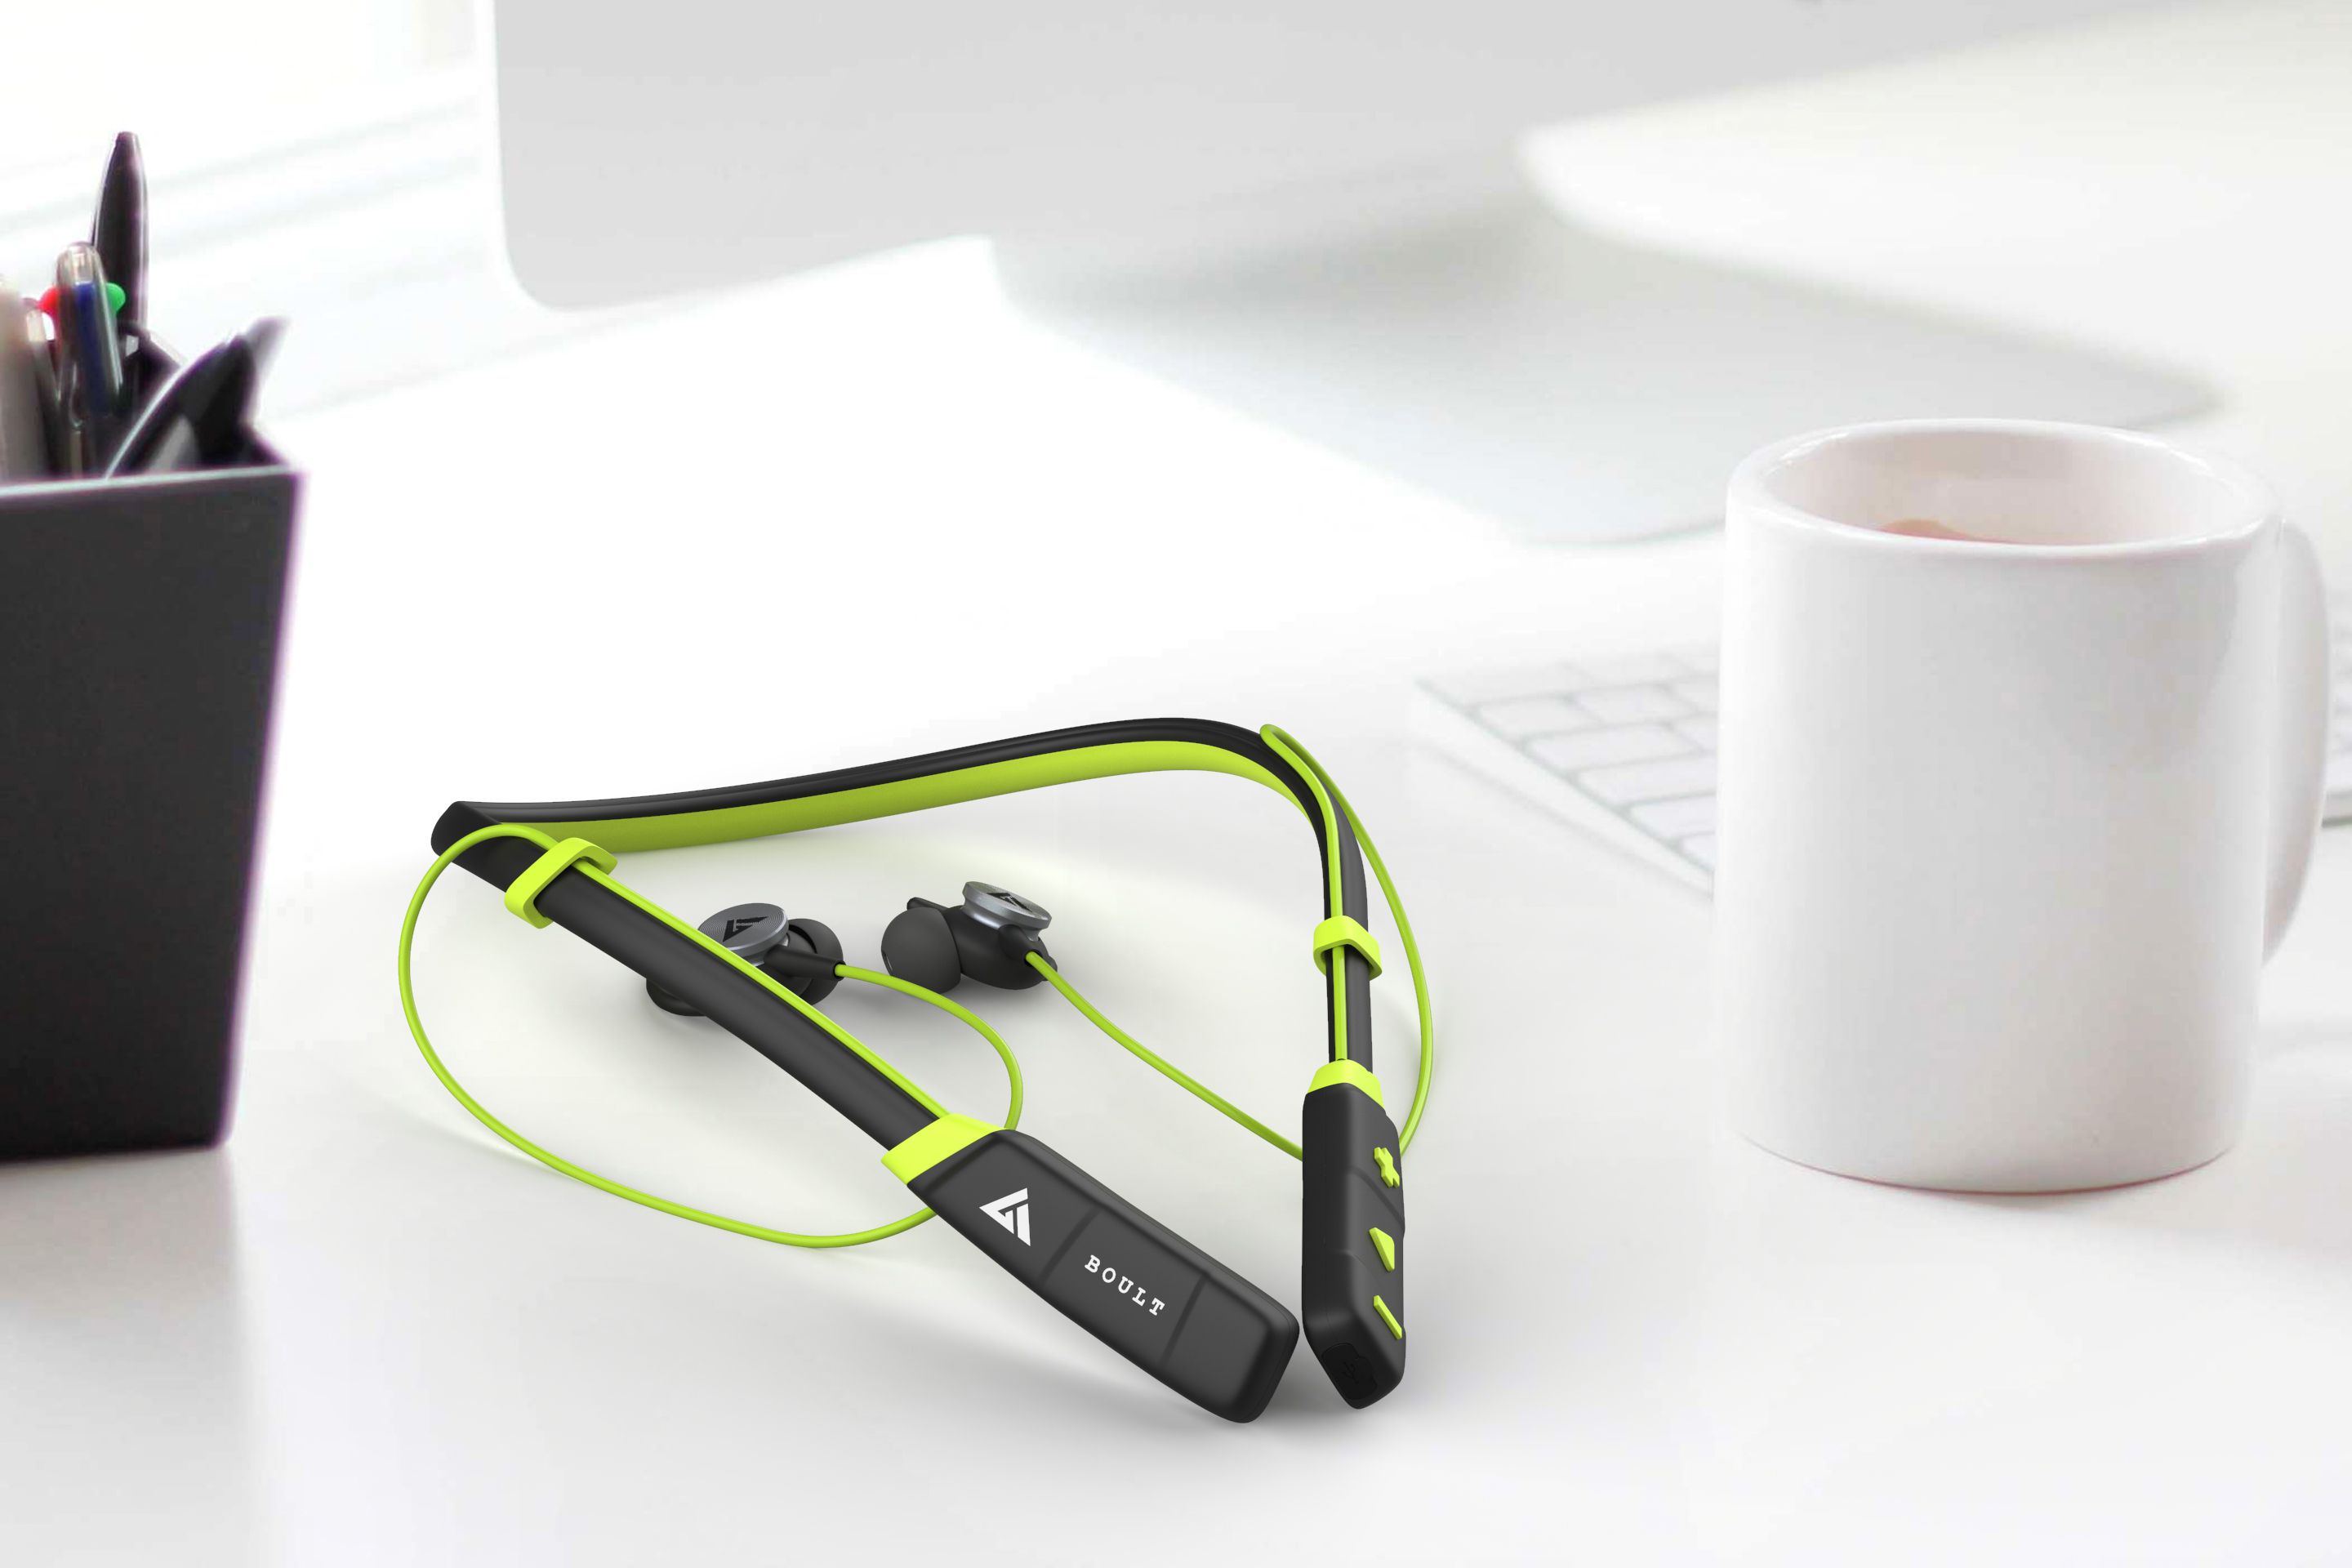 Boult Audio Launches Curve Pro Water Resistant Wireless Earphones For INR 1499